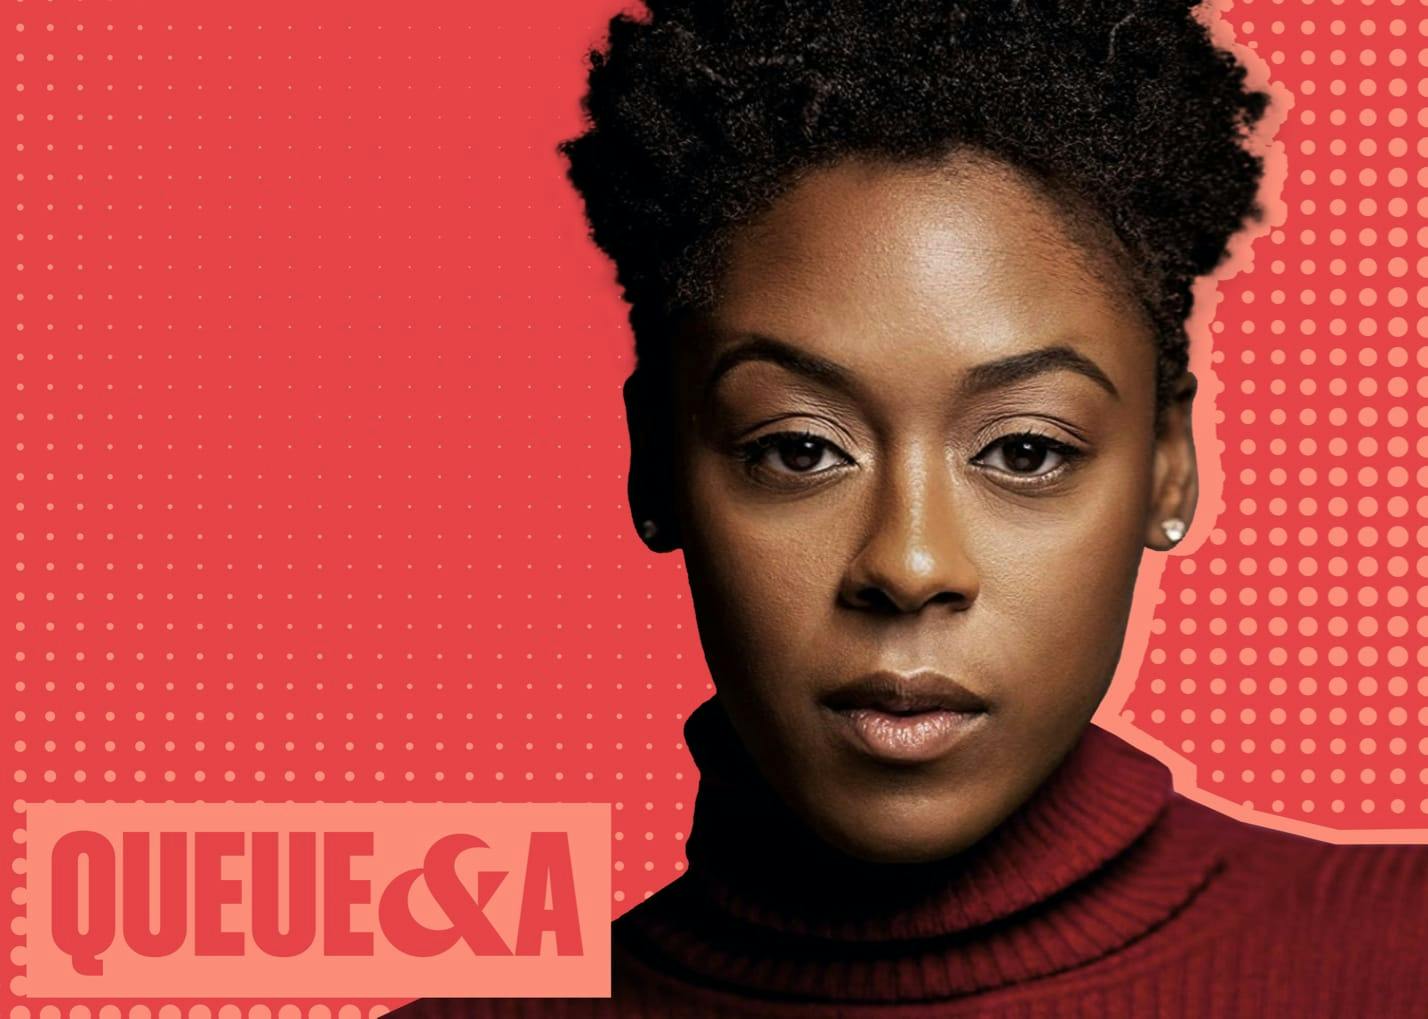 Moses Ingram against a red and pink background. She wears a maroon turtleneck, earrings, and looks directly at the camera. On the left of this image reads: Queue & A.